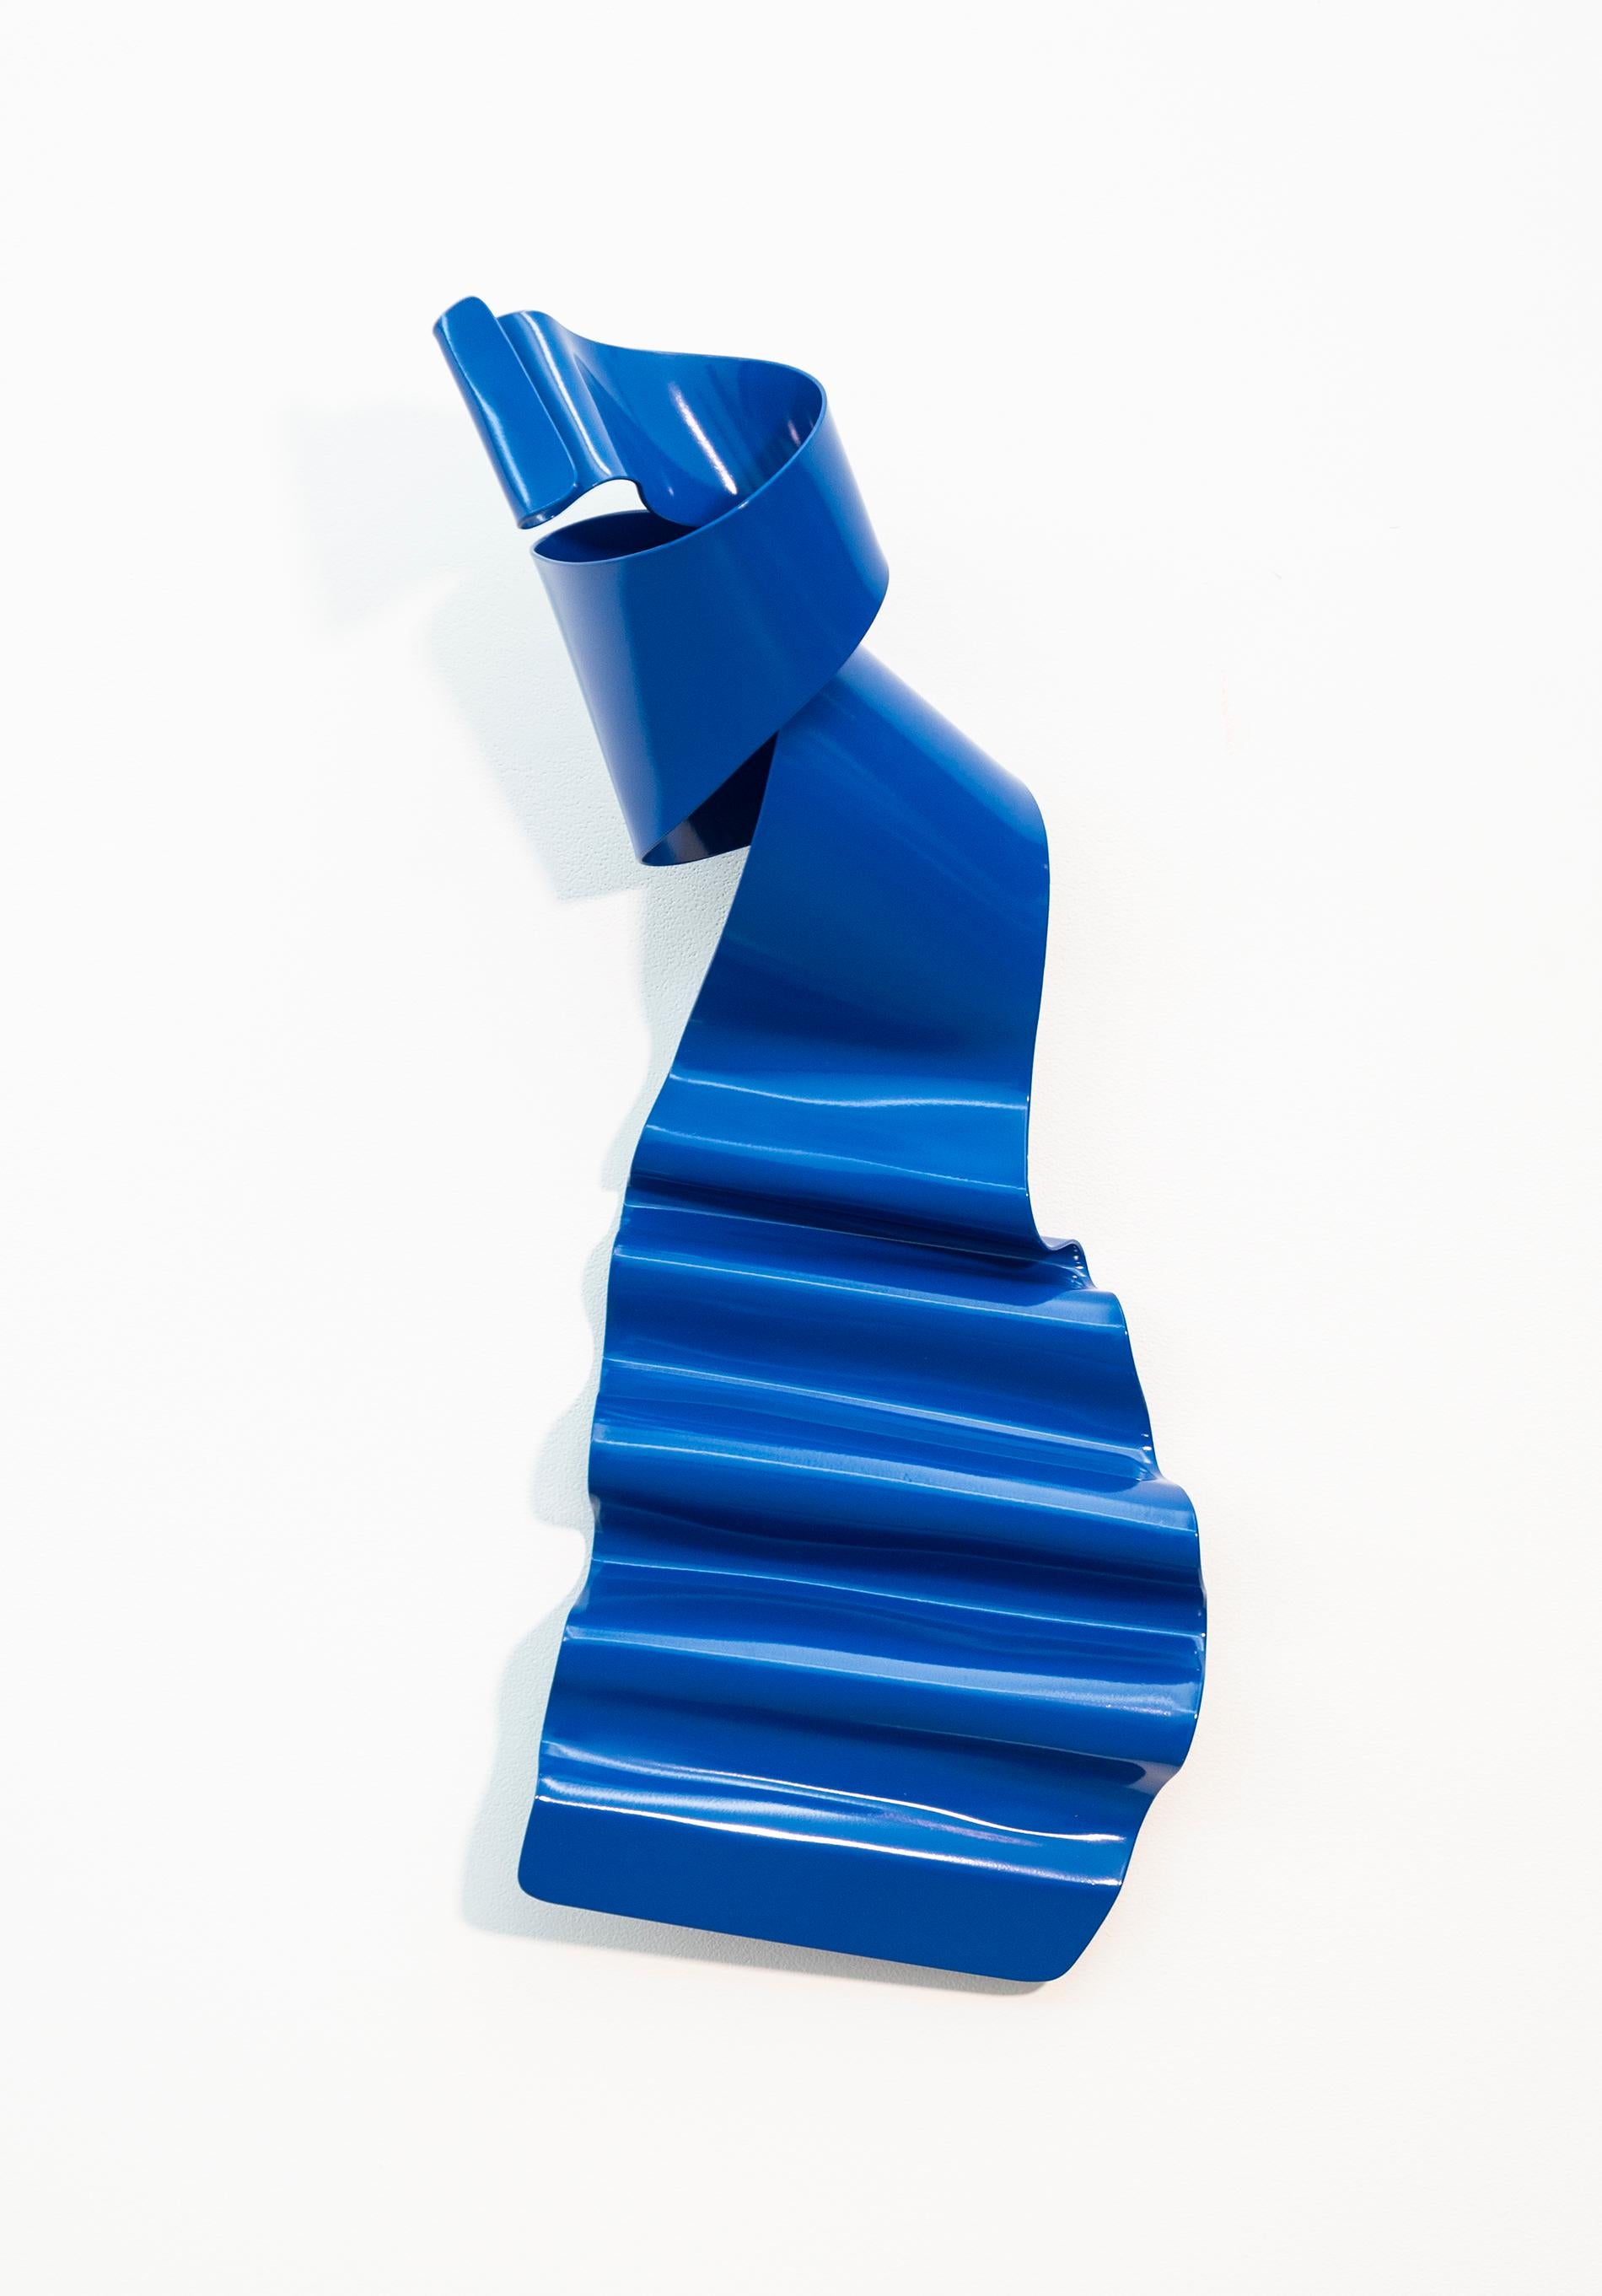 Soul Gate 45 - glossy, contemporary, ribbon, powder coated steel, wall sculpture - Sculpture by Stefan Duerst